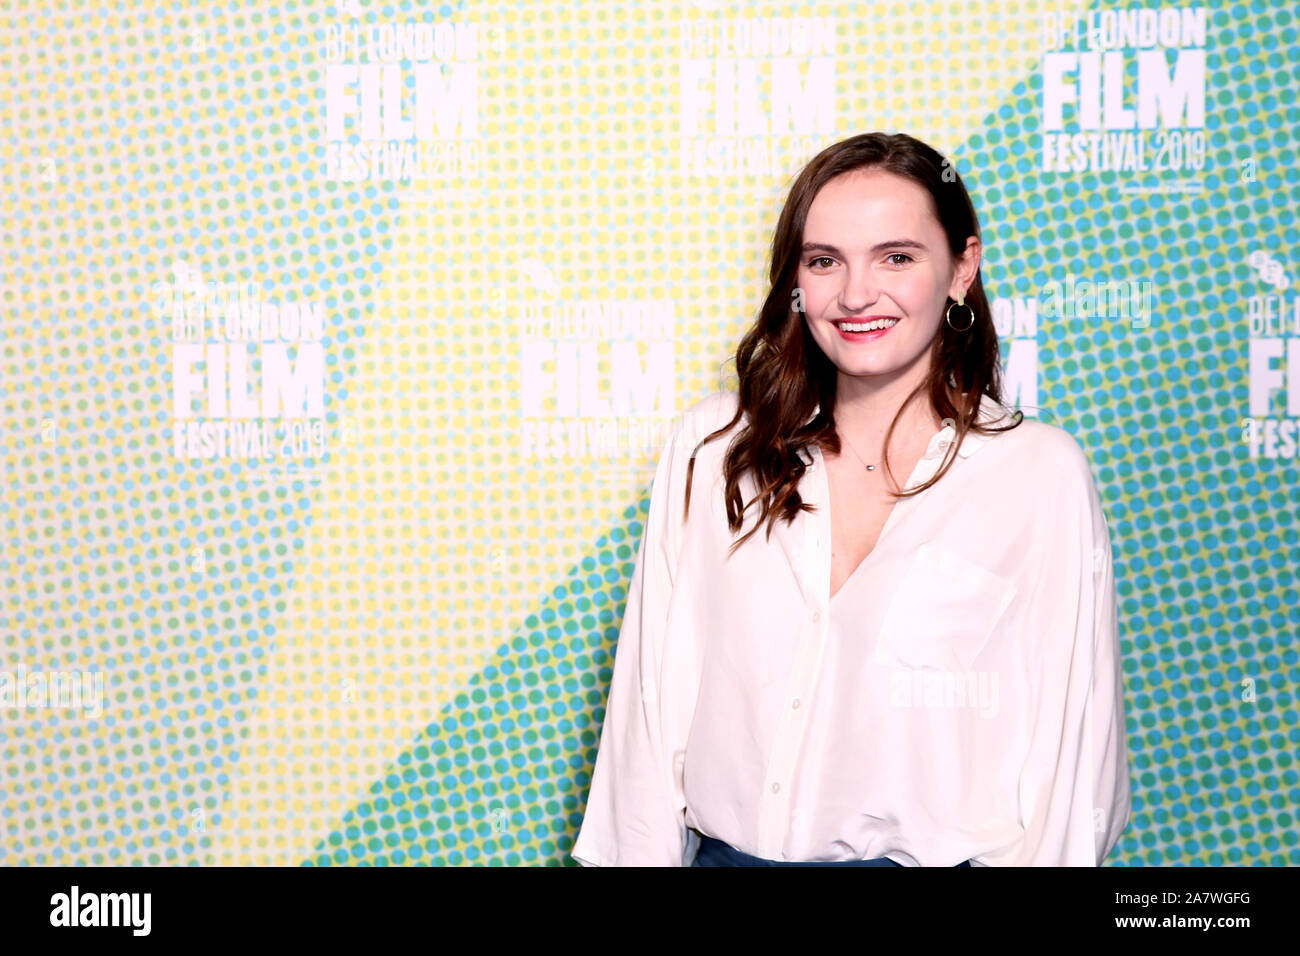 The BFI 63rd London Film Festival World Premiere of 'Our Ladies' held at the Embankment Garden Cinema - Arrivals Featuring: Abigail Lawrie Where: London, United Kingdom When: 04 Oct 2019 Credit: Mario Mitsis/WENN.com Stock Photo